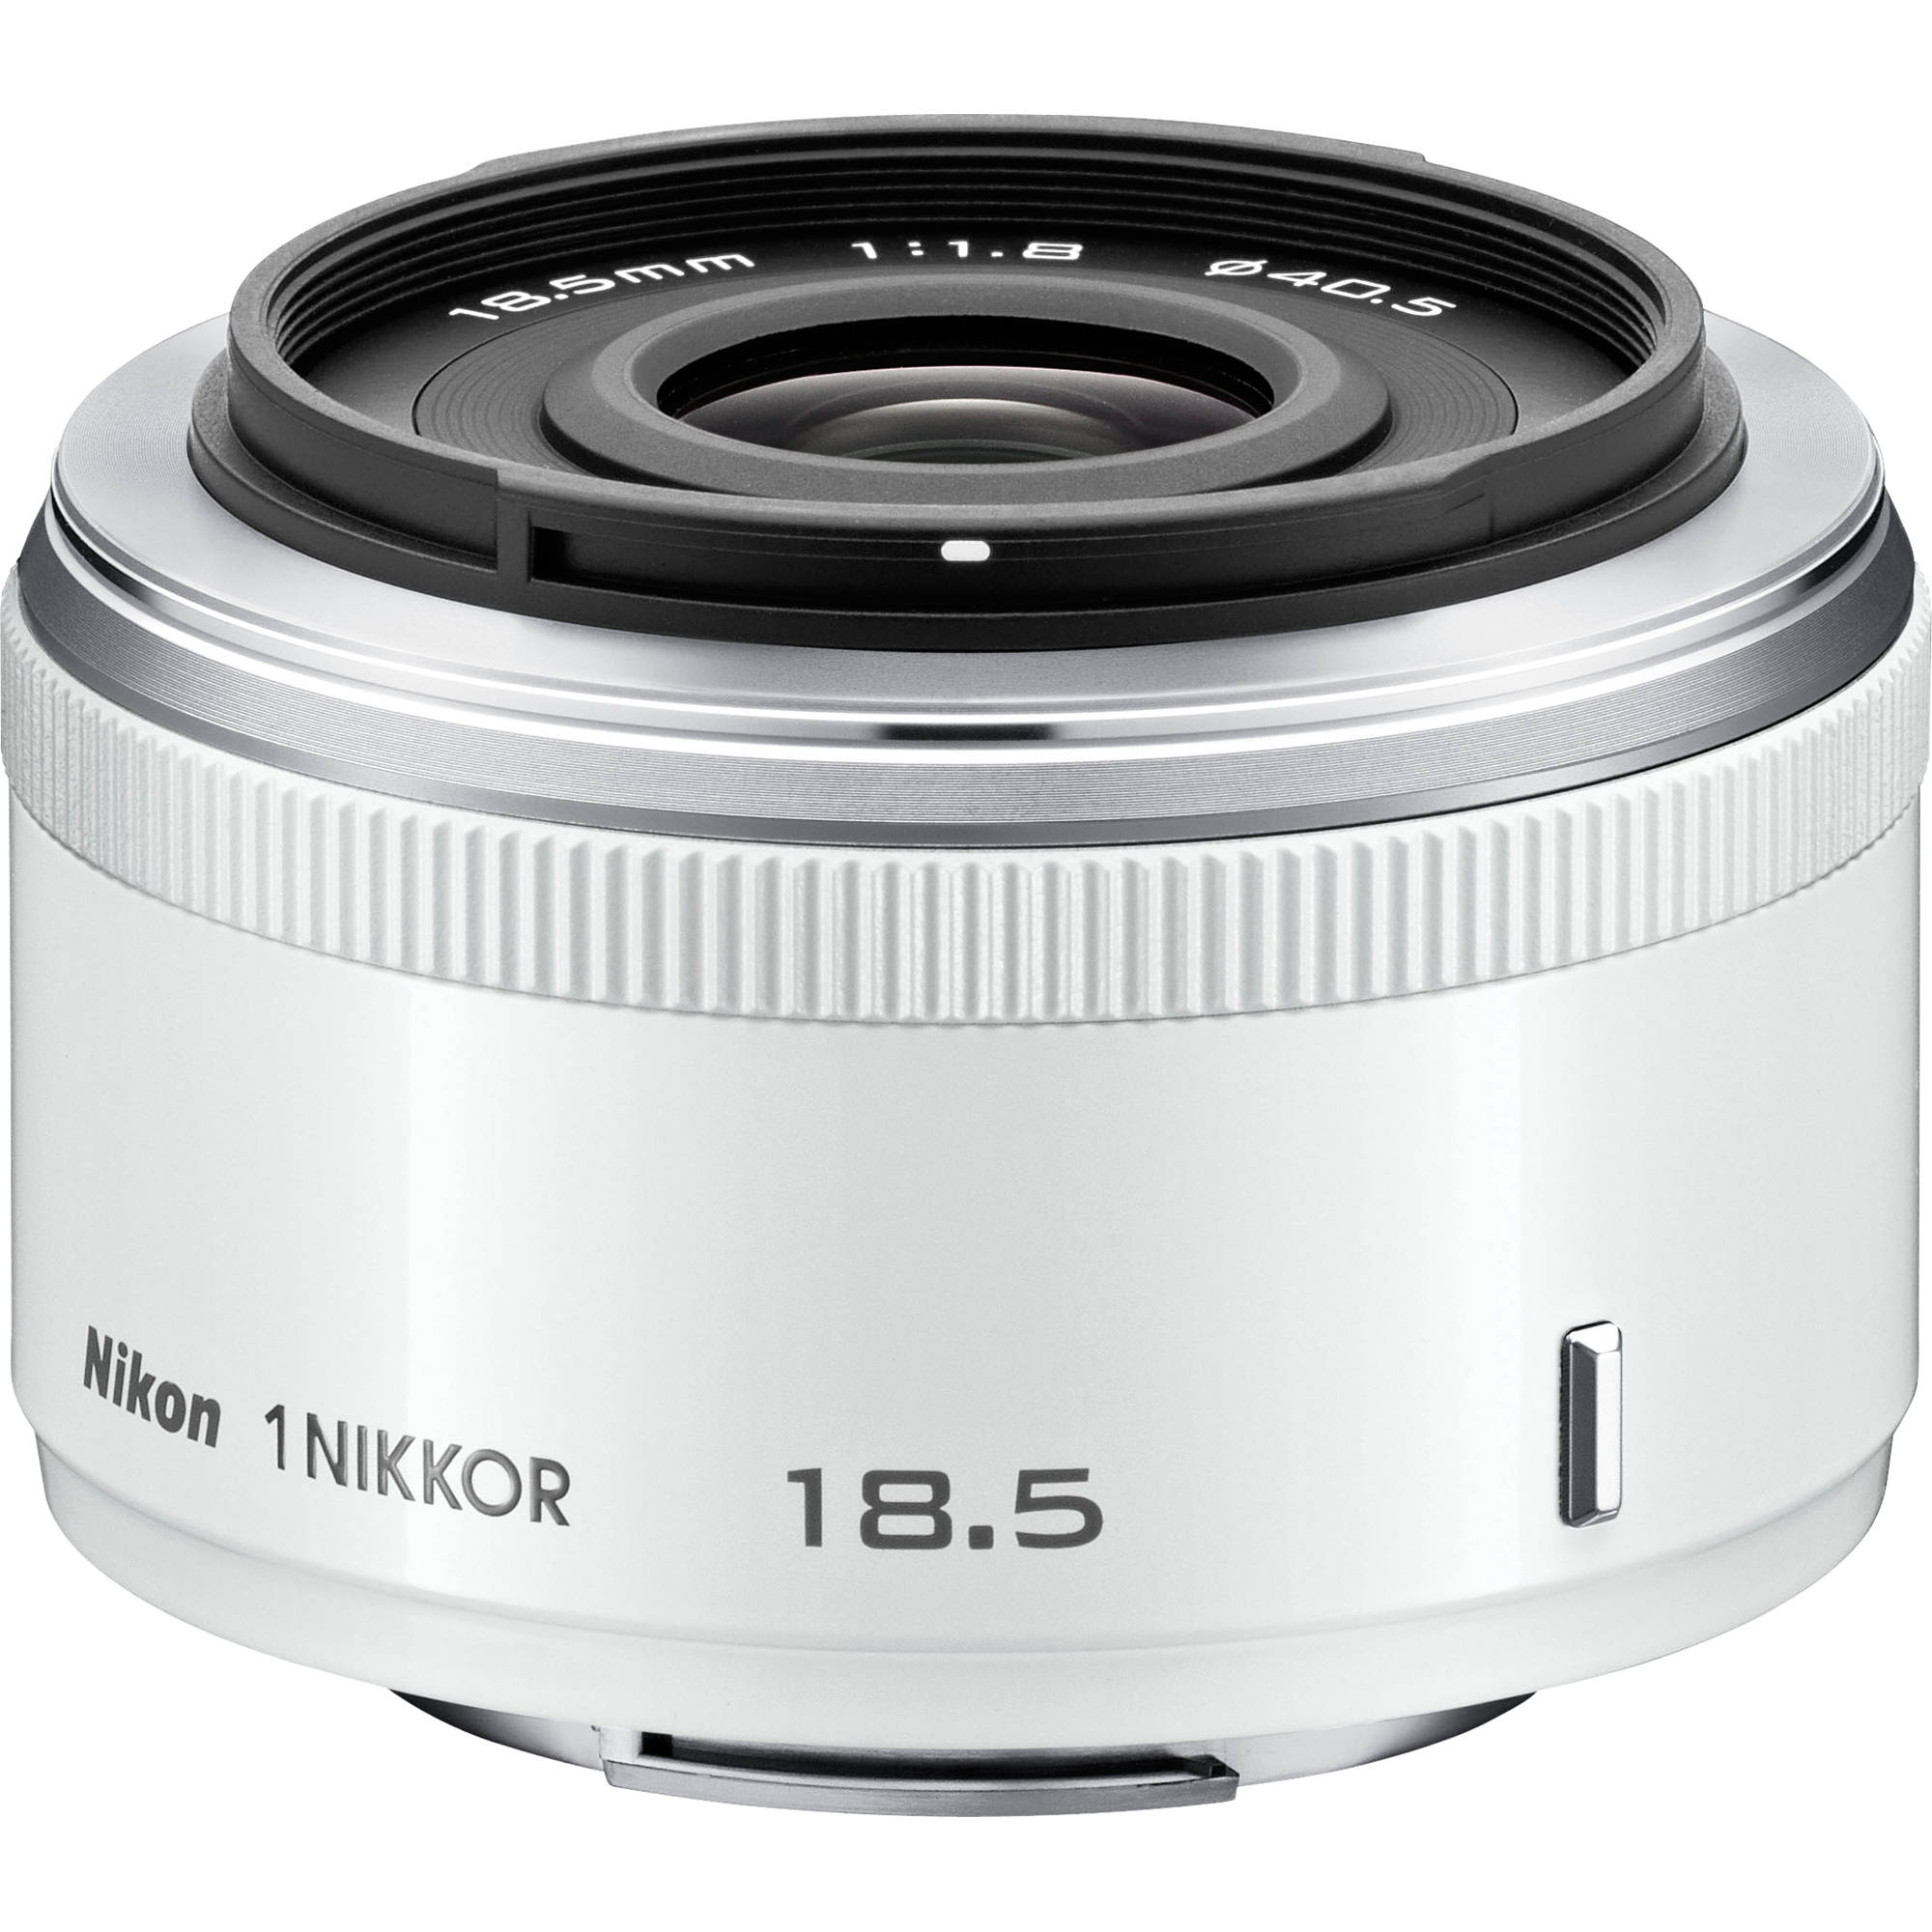 Used: Nikon 1 18.5mm f/1.8 White (for Nikon 1 CX System) [S06012302] Used Nikon Second Hand